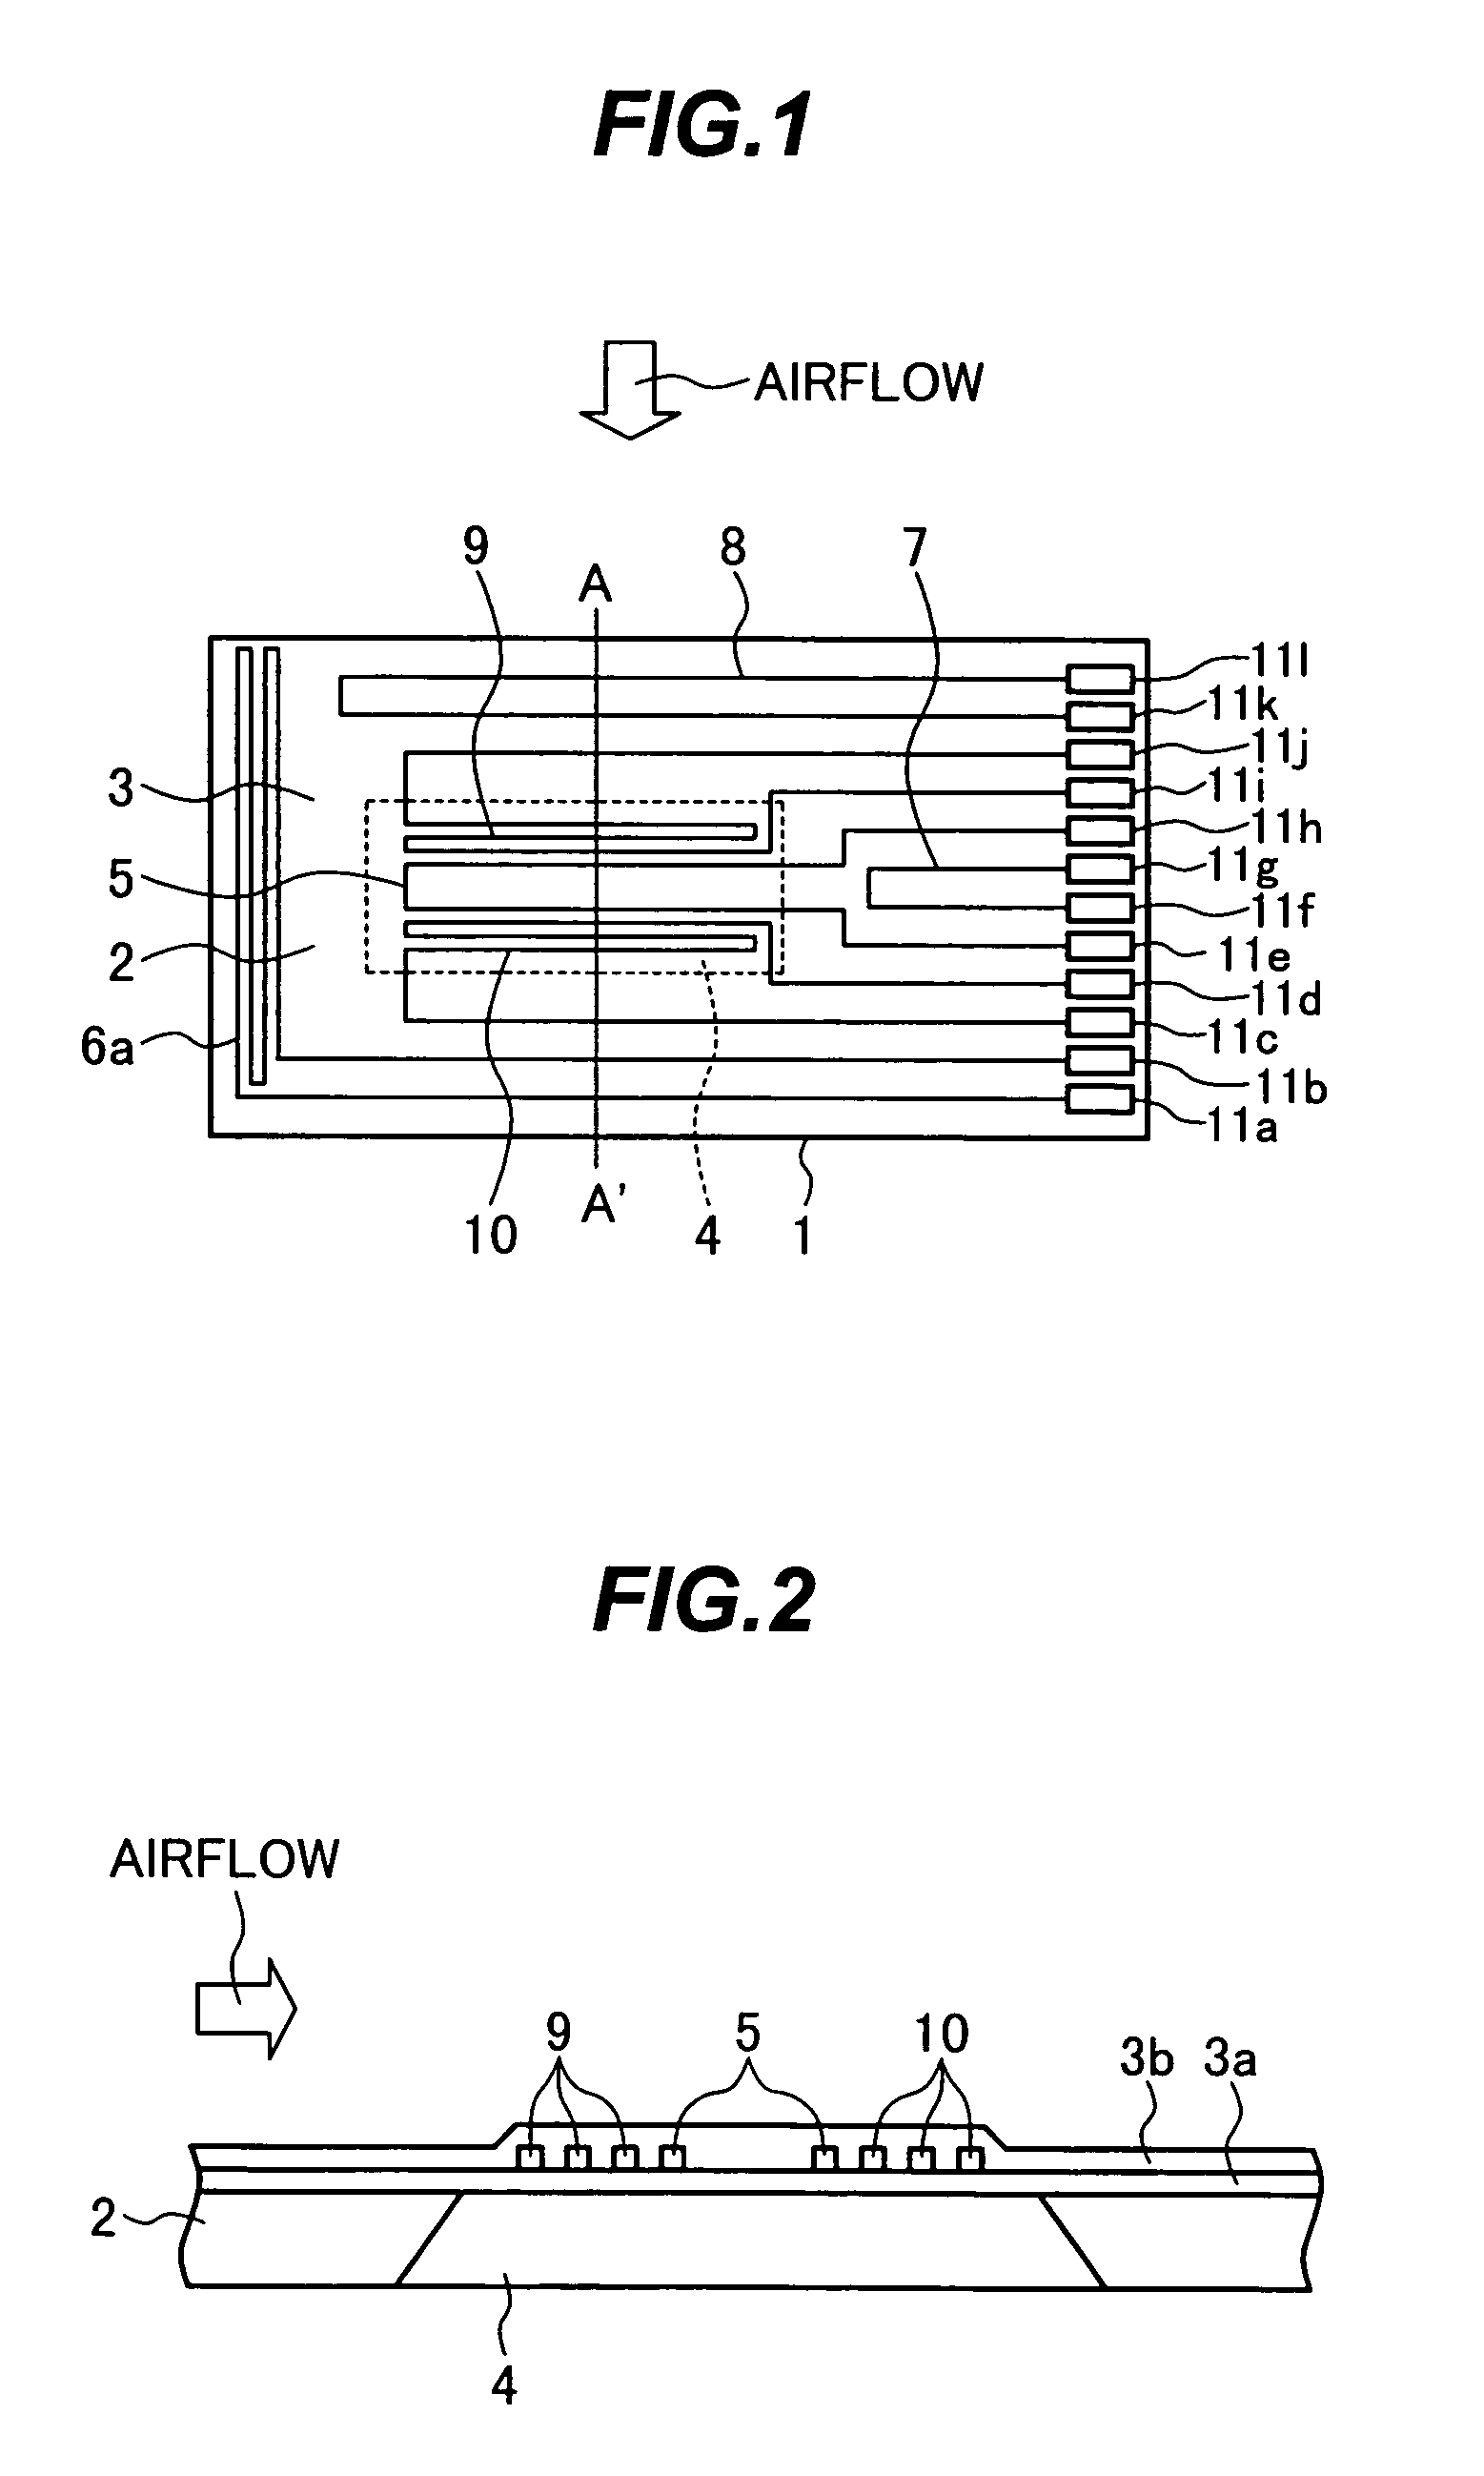 Thermal flowmeter for measuring a flow rate of fluid